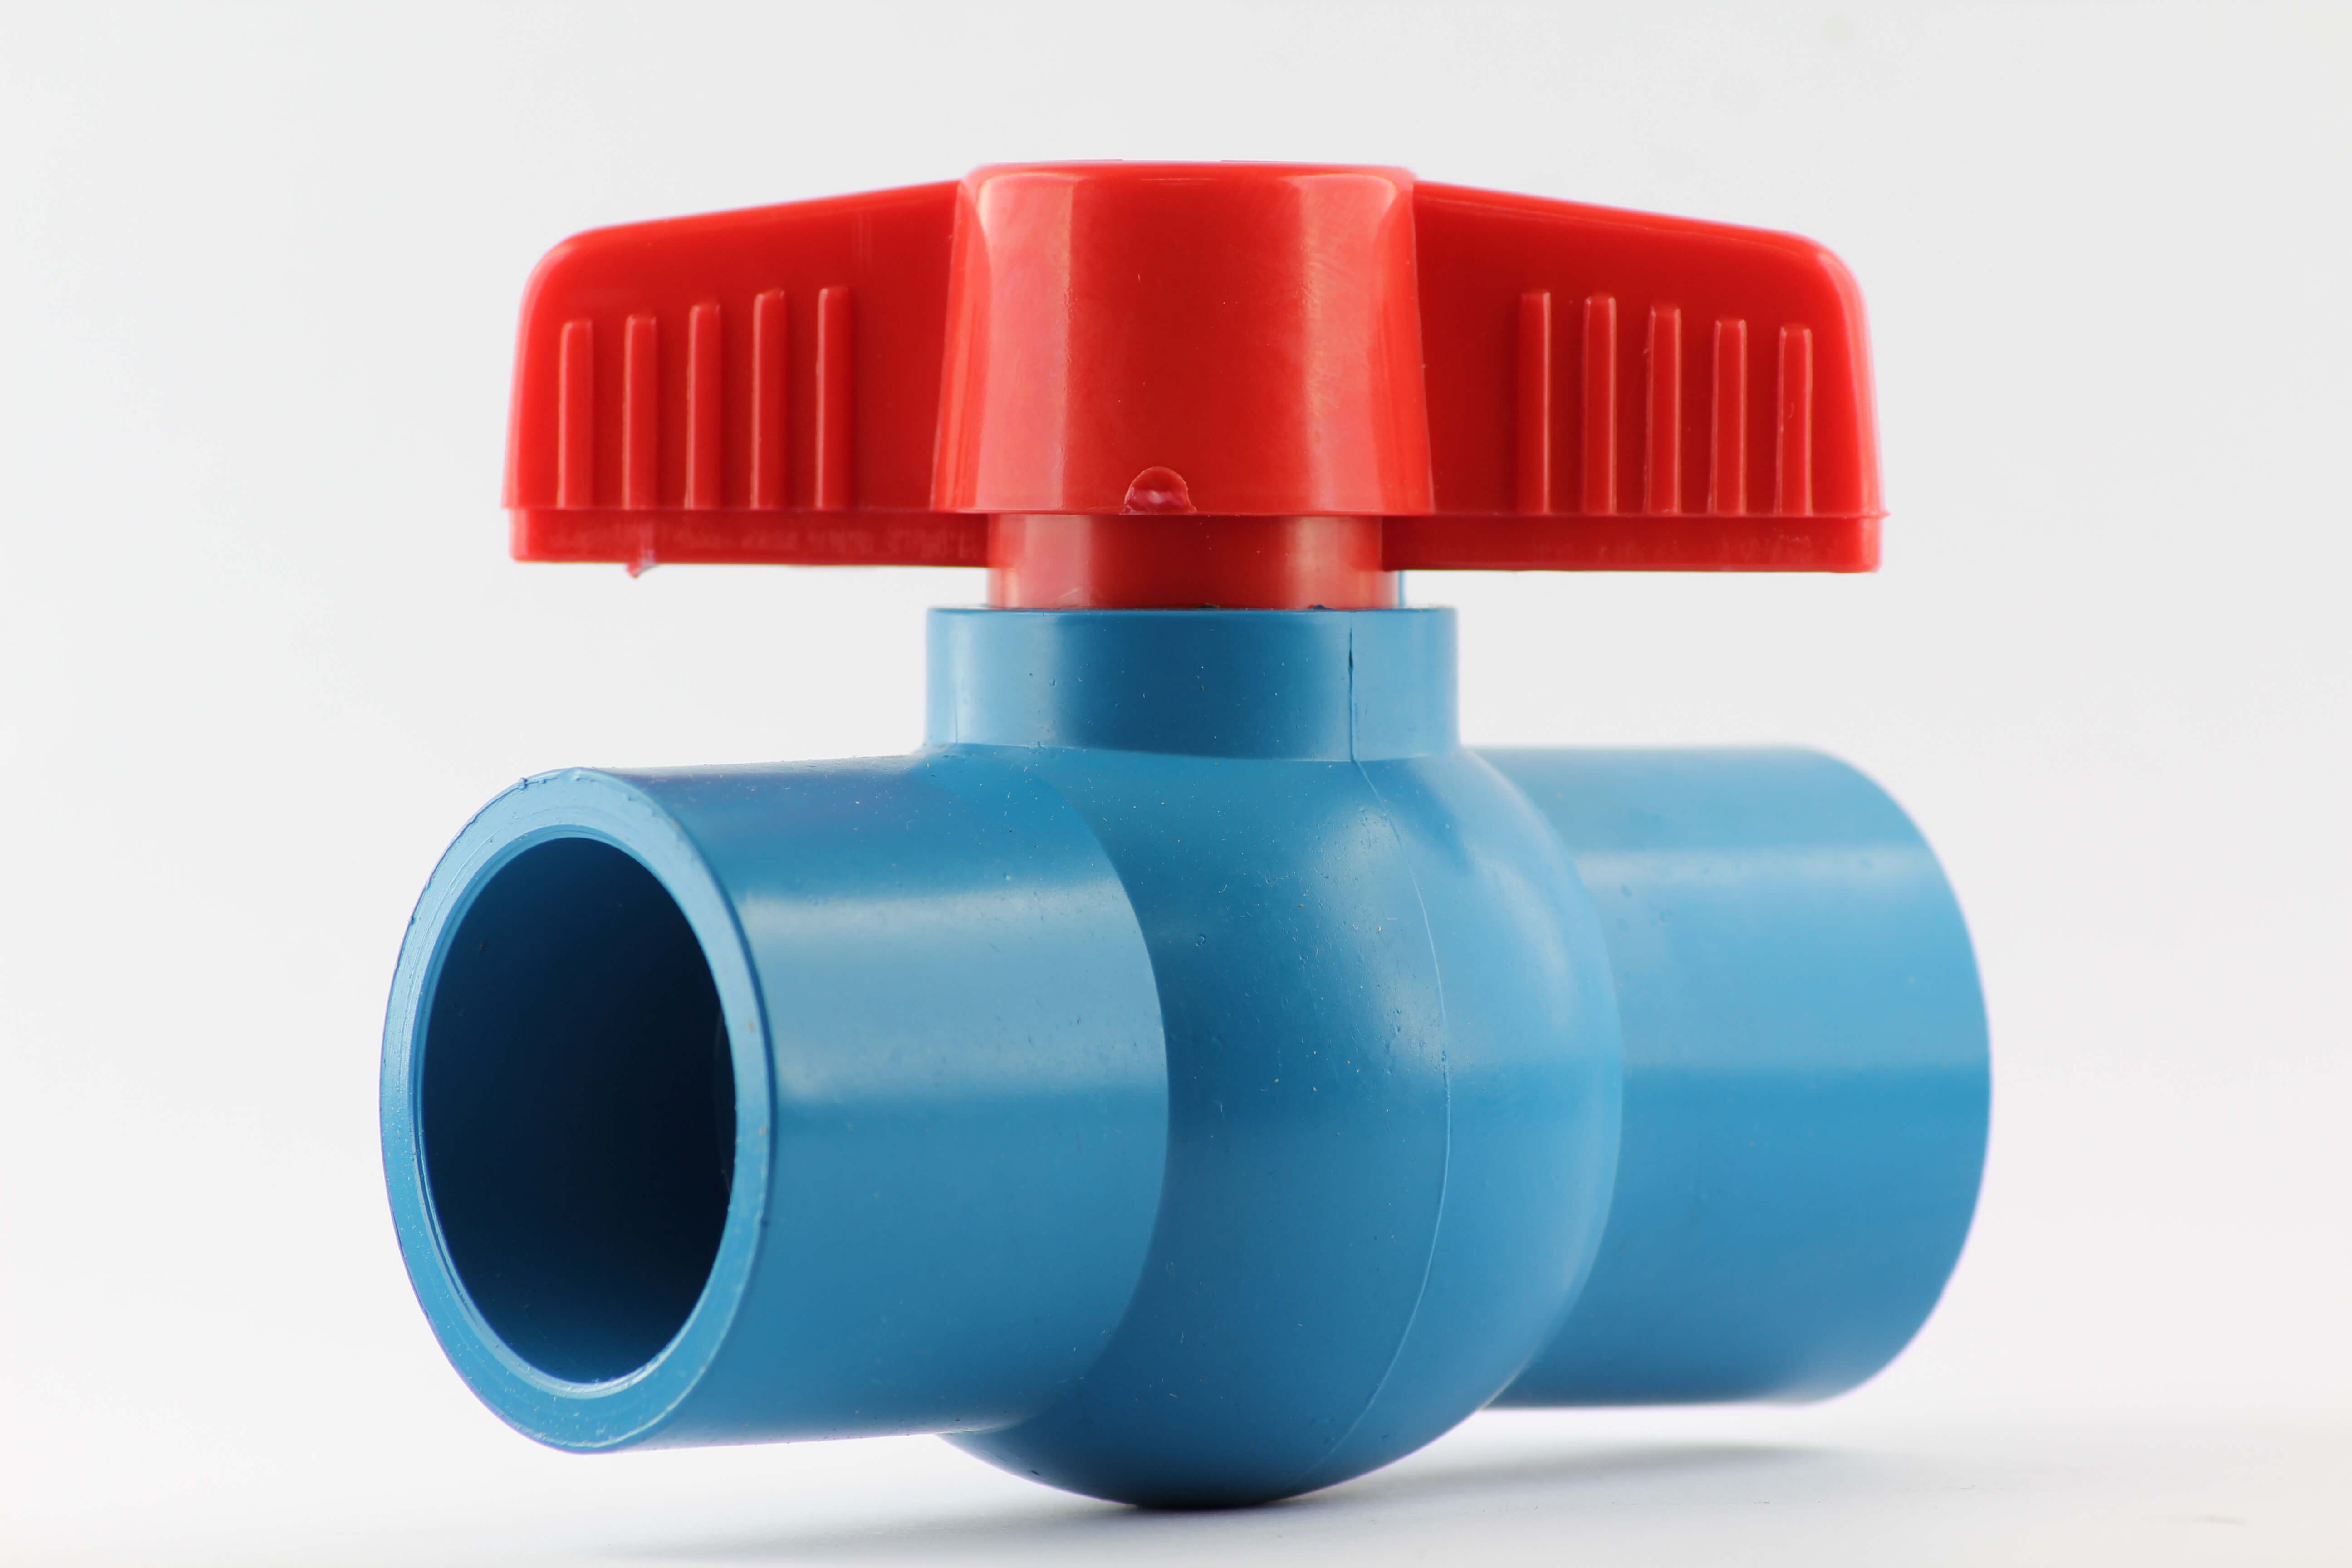 And the Medal Goes to: The Advantages and Disadvantages of Plastic Valves